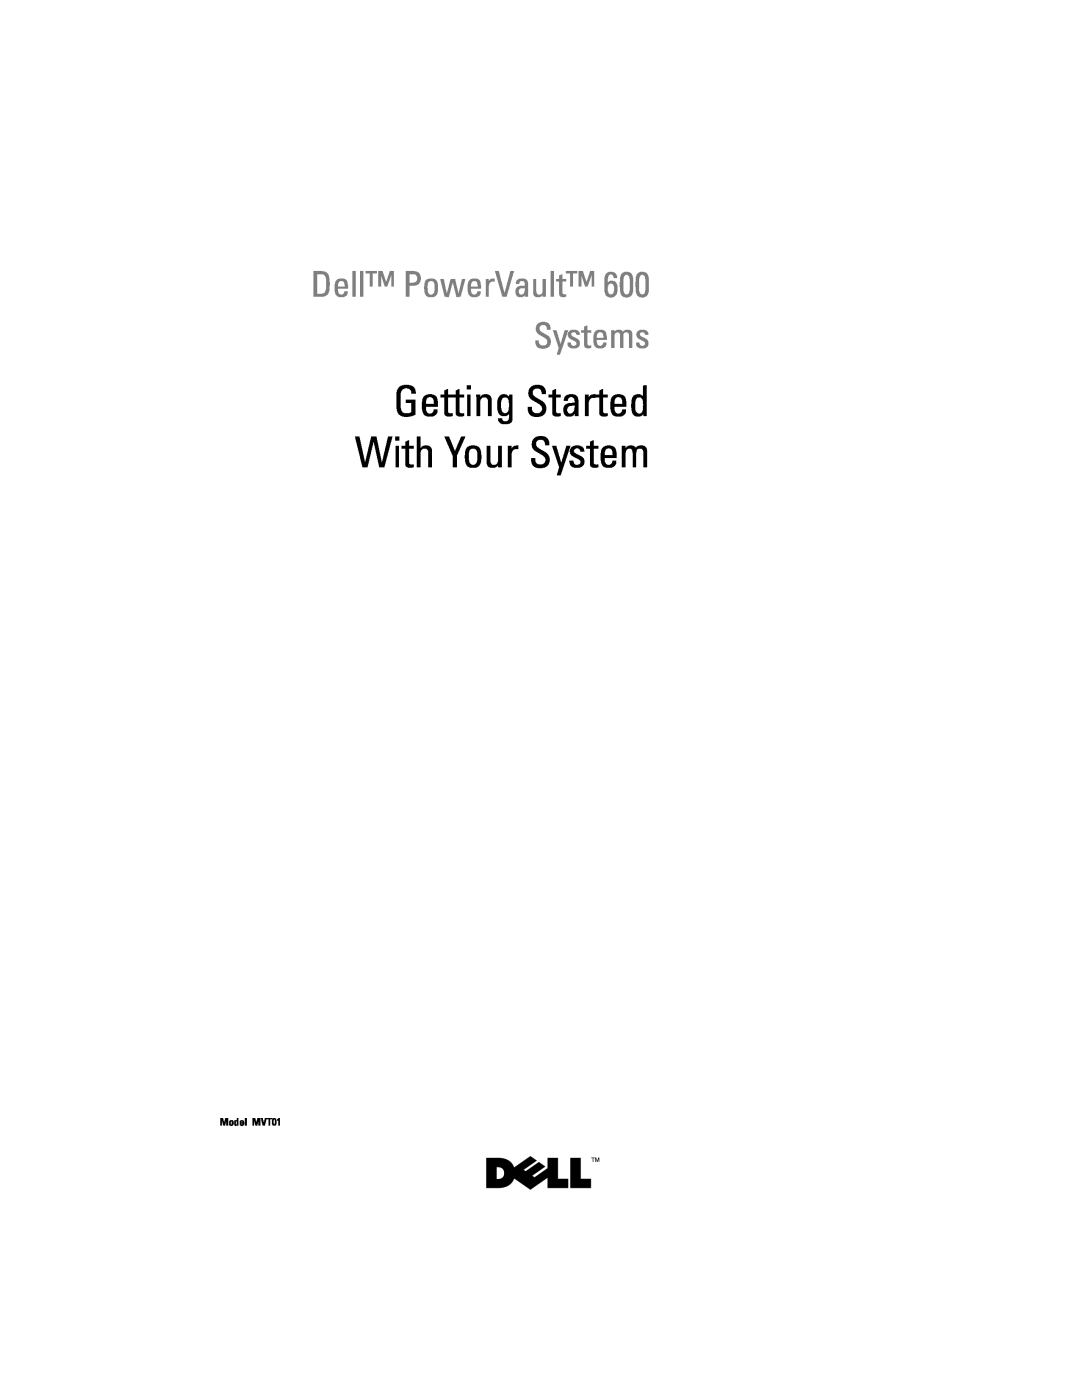 Dell CX193 manual Getting Started With Your System, Dell PowerVault 600 Systems, Model MVT01 